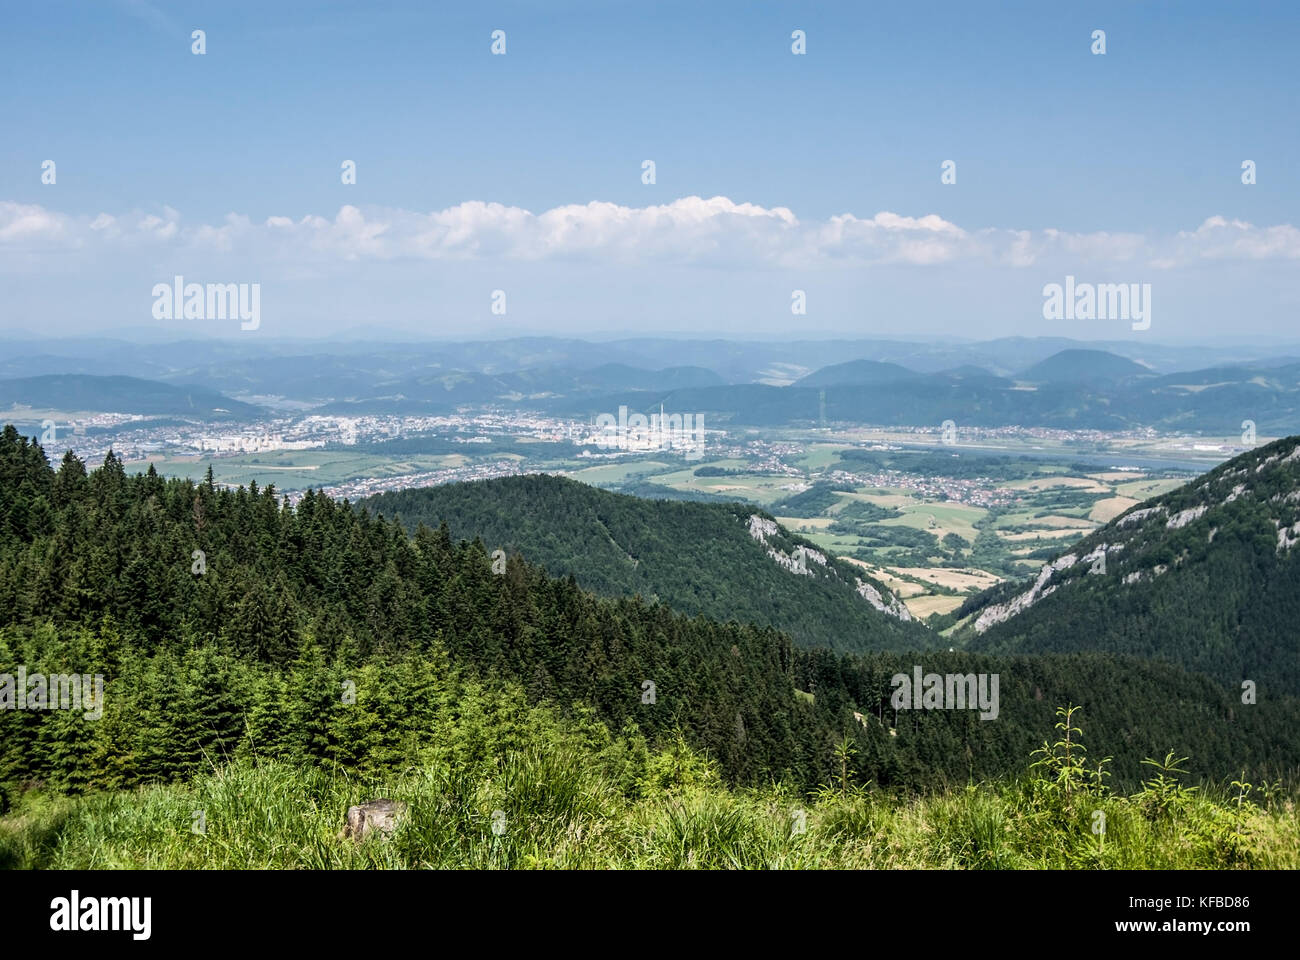 Zilina city with Vah river valley and hills around in Slovakia from meadow near hiking trail between Mincol hill and Visnove in Mala Fatra mountains Stock Photo